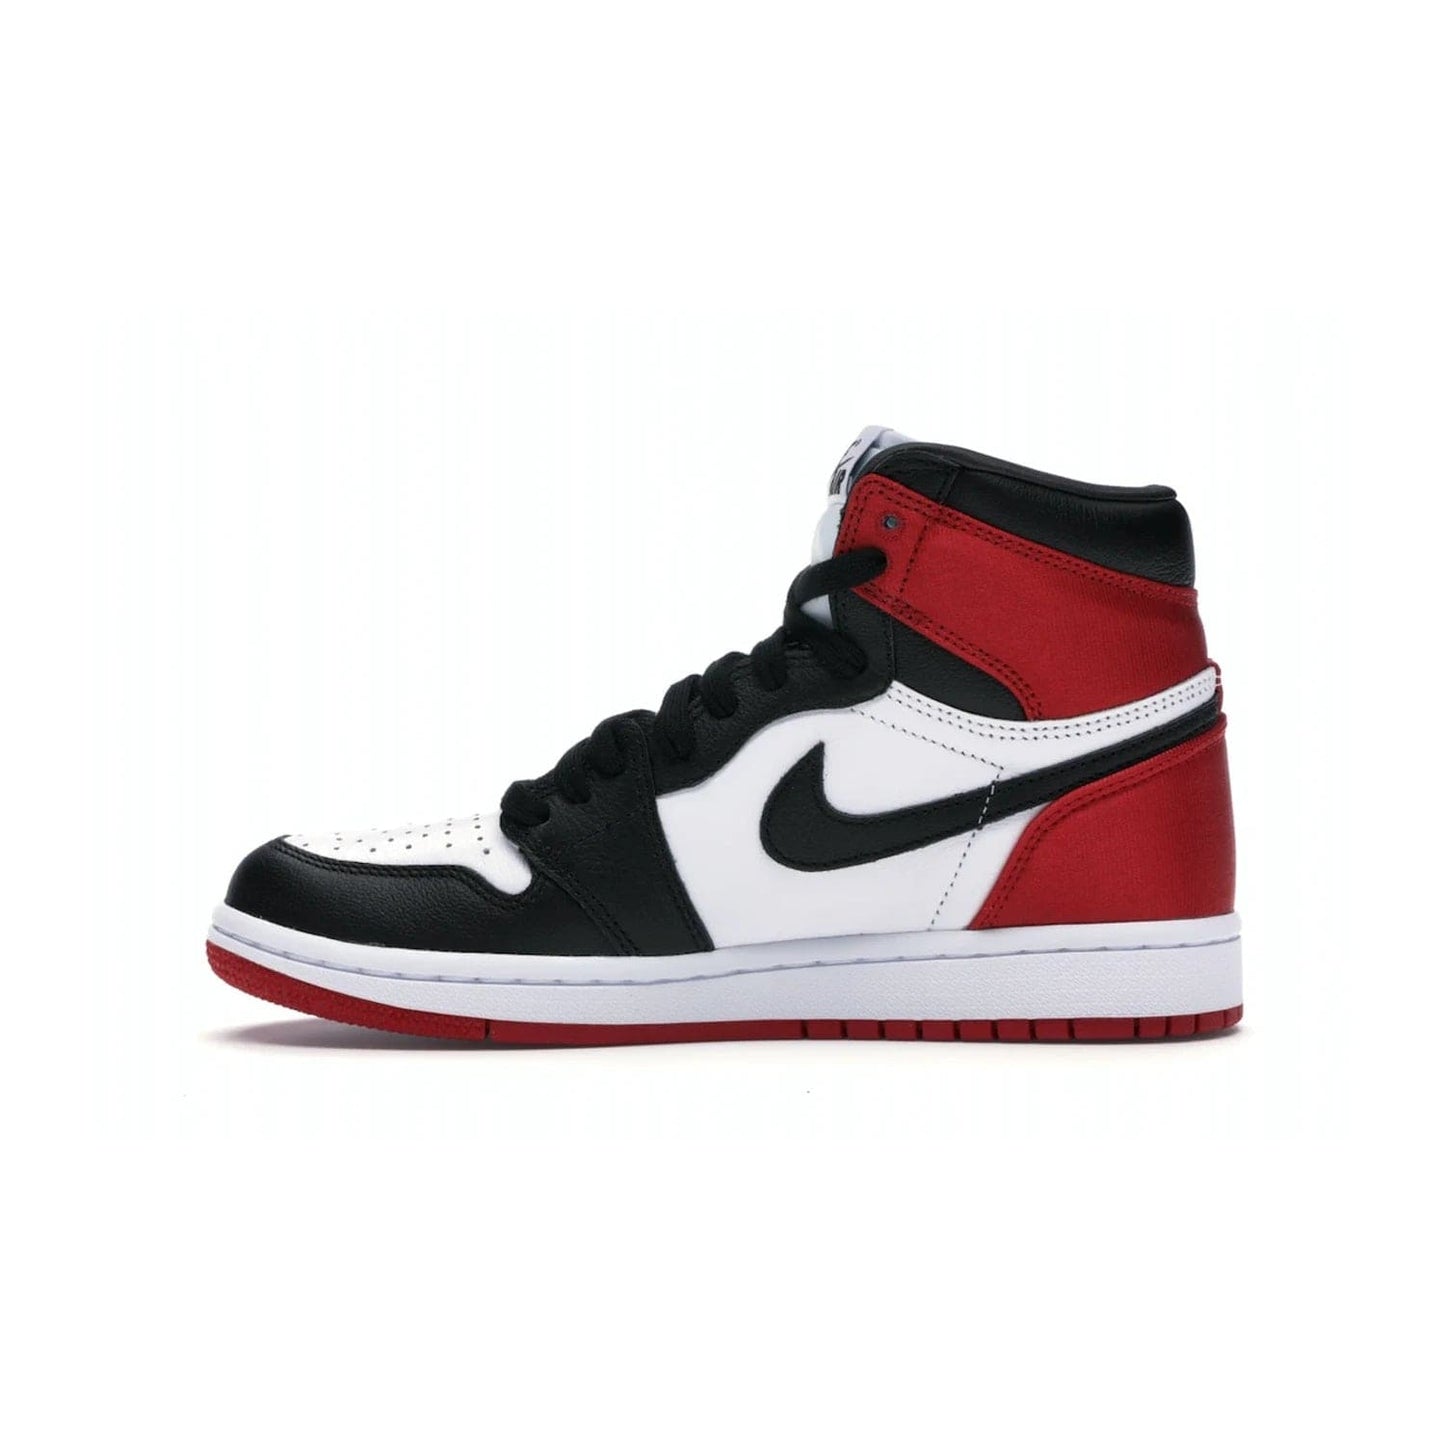 Jordan 1 Retro High Satin Black Toe (Women's) - Image 19 - Only at www.BallersClubKickz.com - Luxurious take on the timeless Air Jordan 1. Features a mix of black leather and satin materials with subtle University Red accents. Elevated look with metal Wings logo on the heel. Released in August 2019.